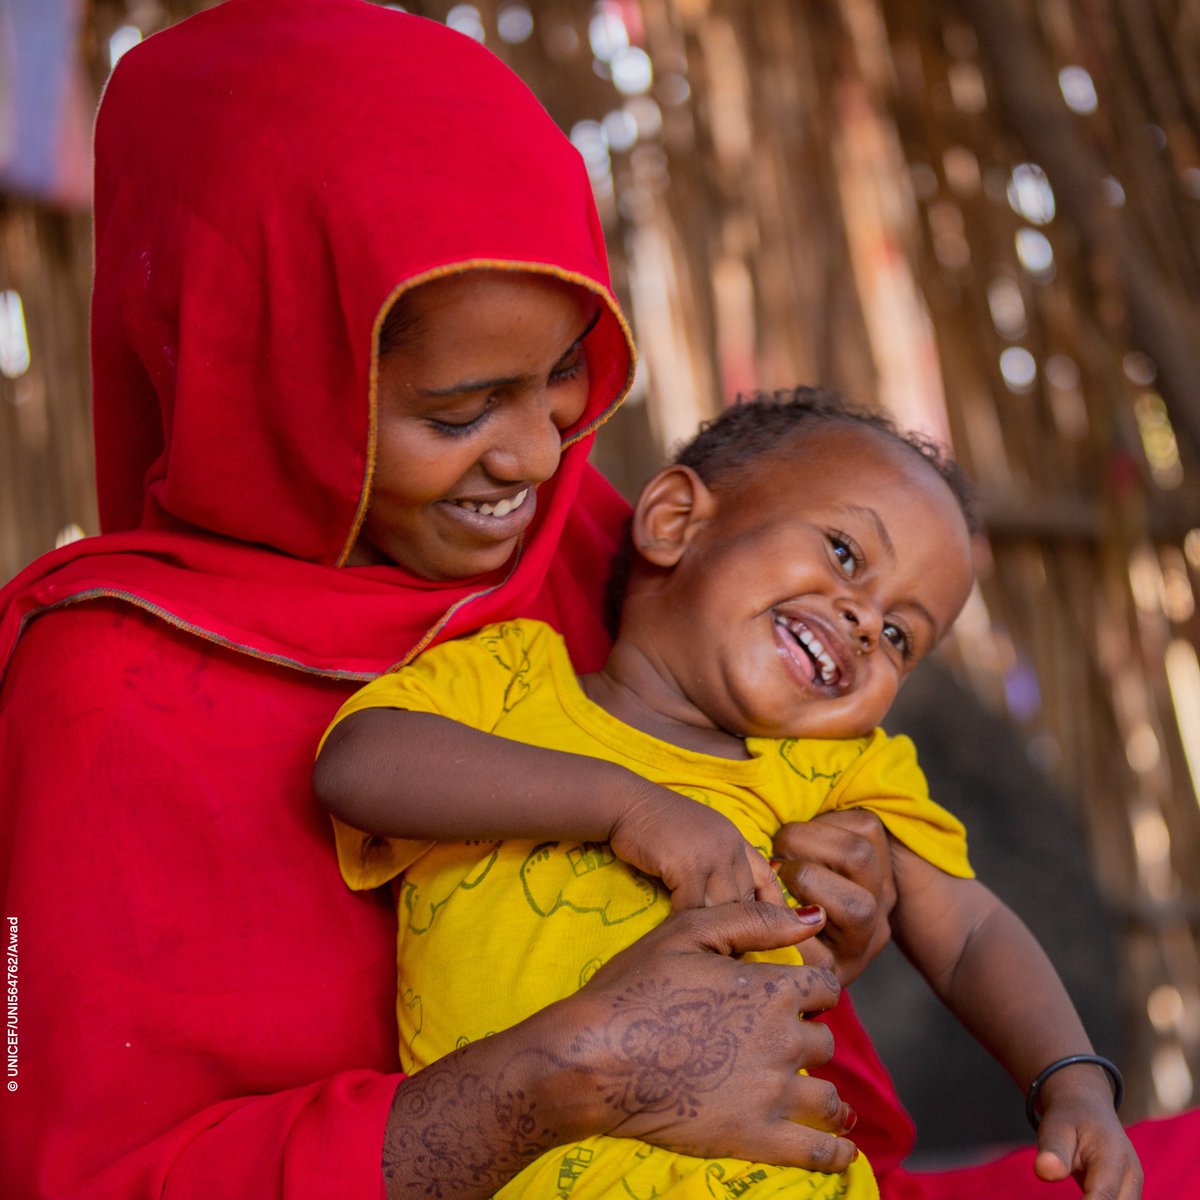 Less than a week to go for #MothersDay! If you're looking for a last-minute gift for an incredible mother in your life, buy a @UNICEFCanada Survival gift. These are life-saving gifts that will help mothers & children lead safe, happy and healthy lives : ow.ly/7vRV50RzJ6x